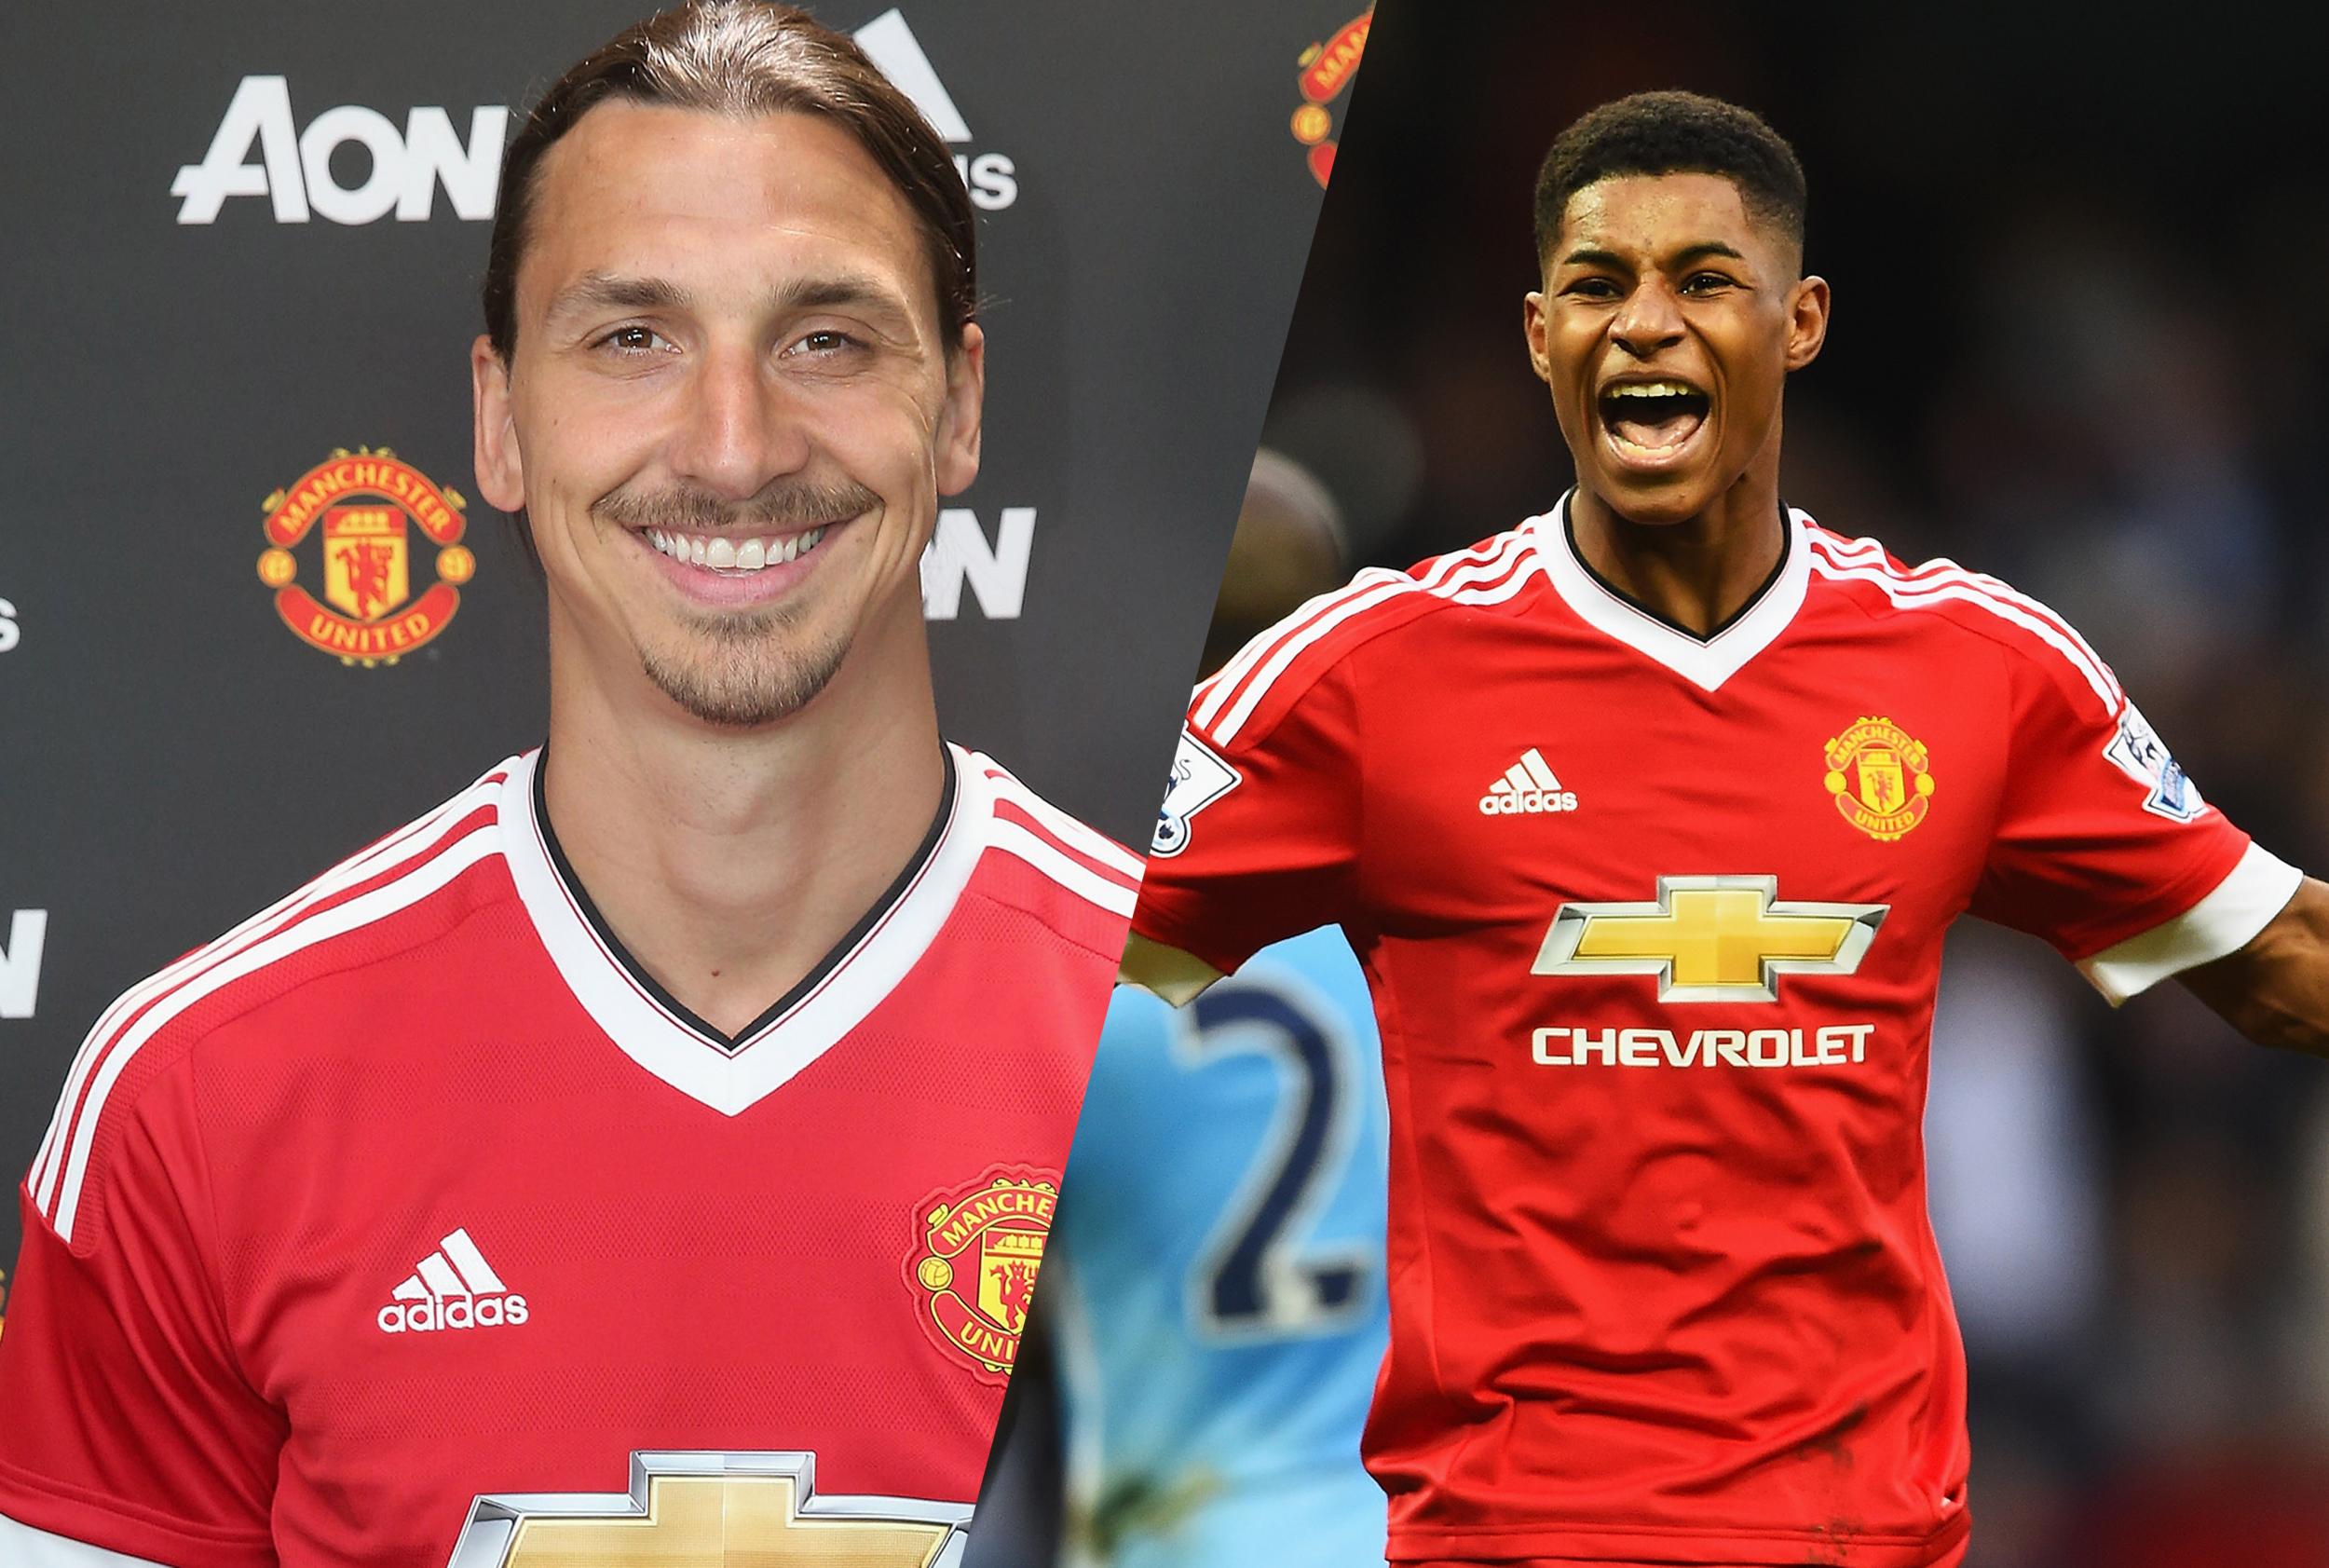 Ibrahimovic and Rashford could line up alongside each other